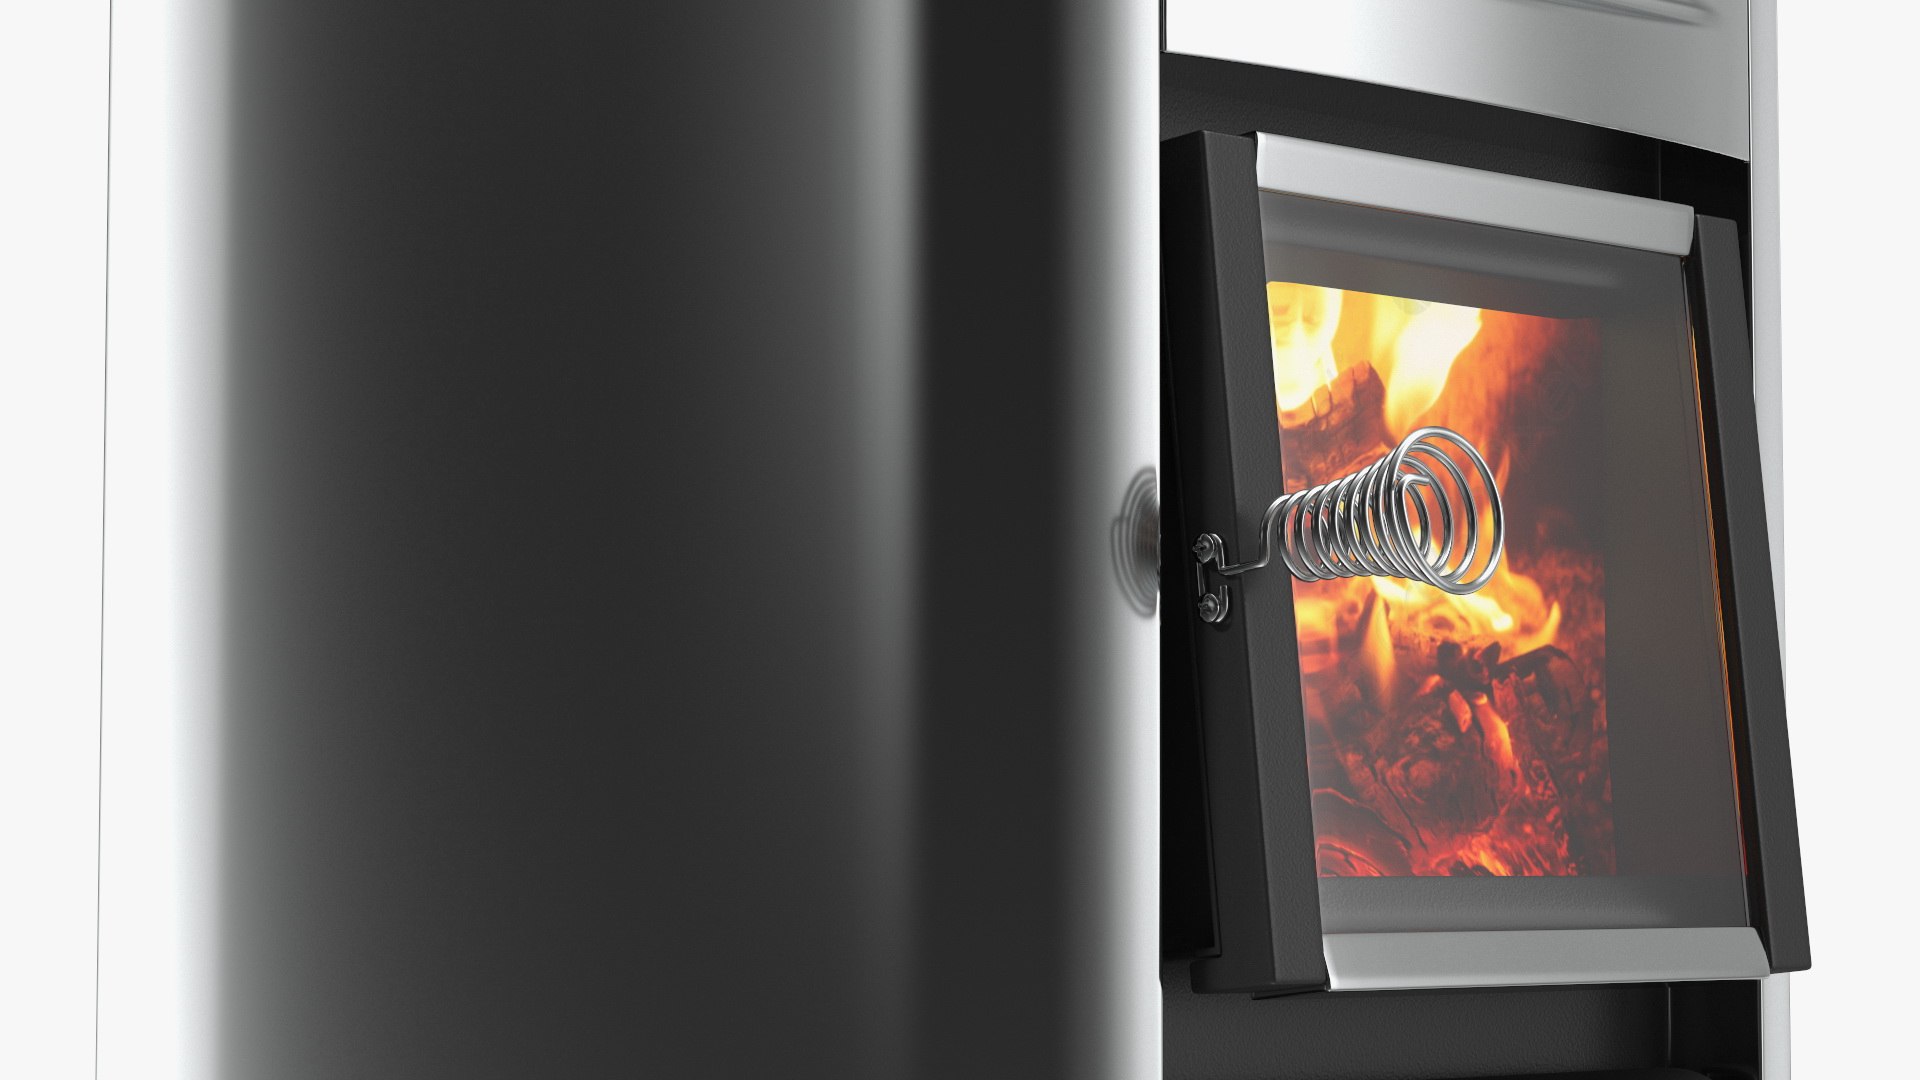 12,786 Wood Heater Images, Stock Photos, 3D objects, & Vectors